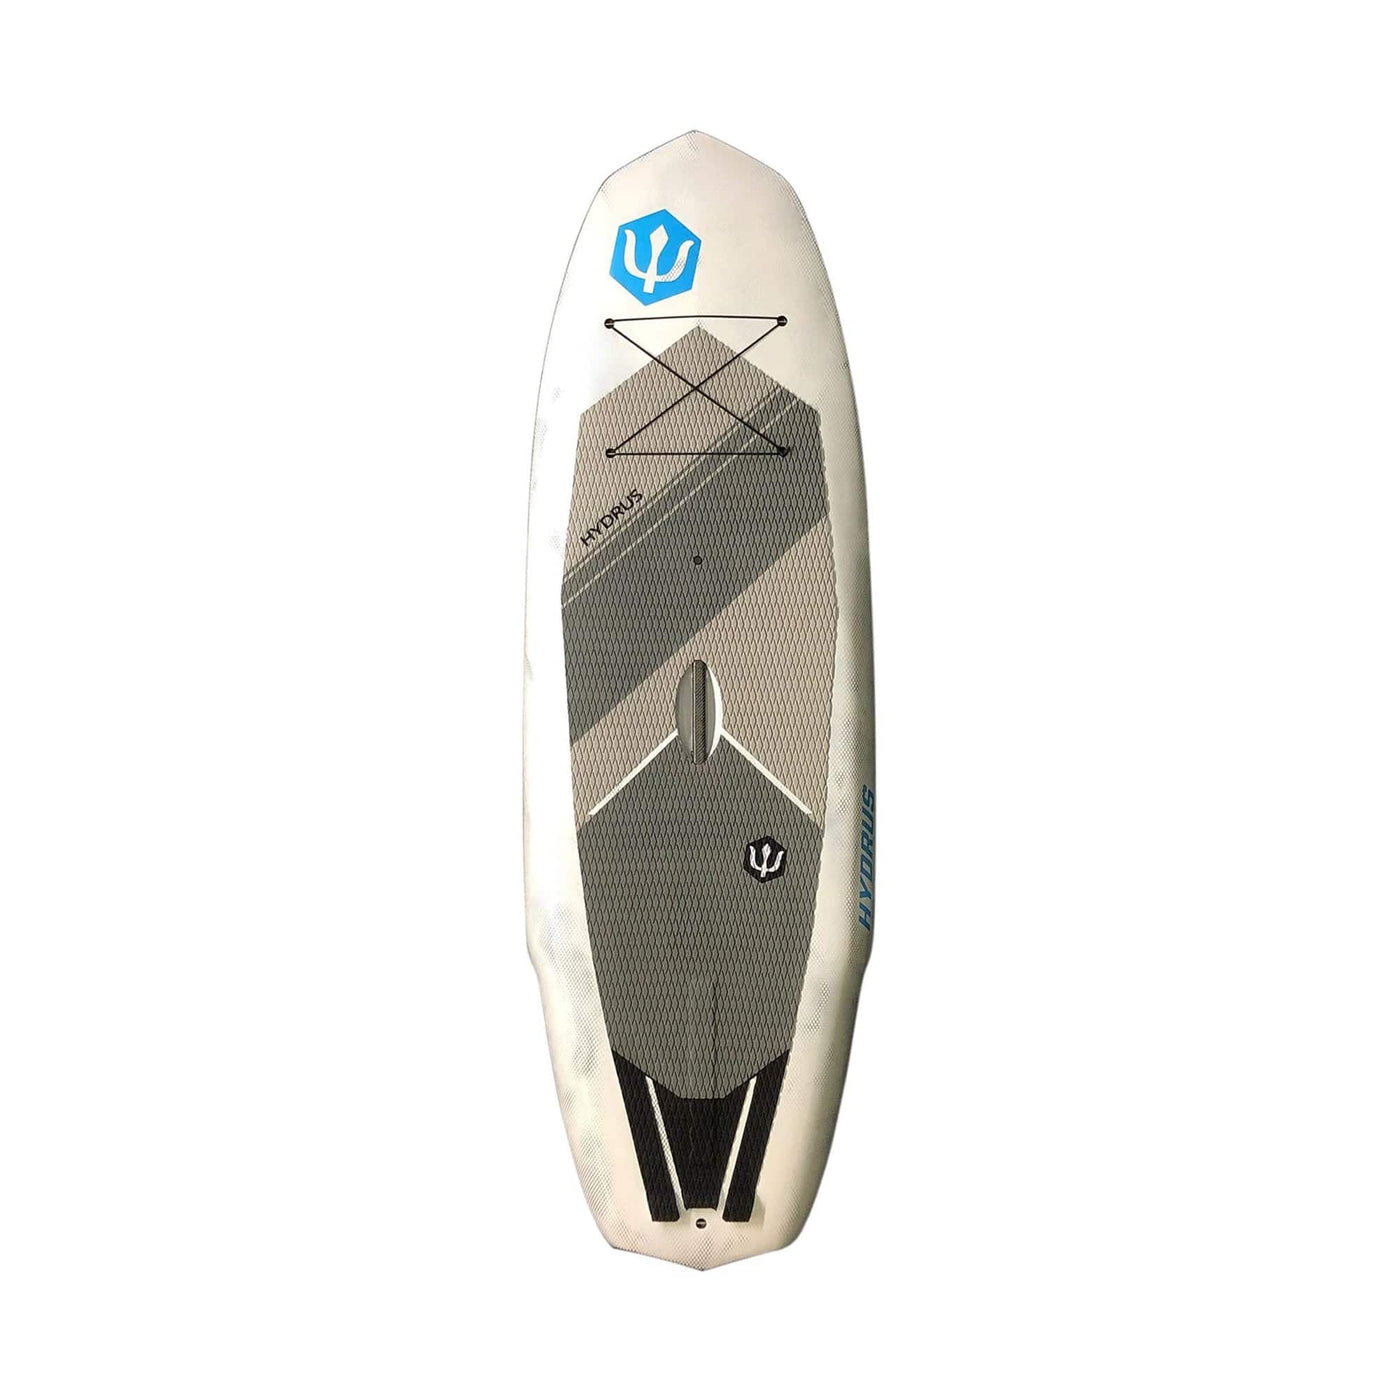 Whitewater Paddle Board - KING DUB Whitewater SUP 9'8"x34.5" / 8'8"x34" | Hydrus Board Tech